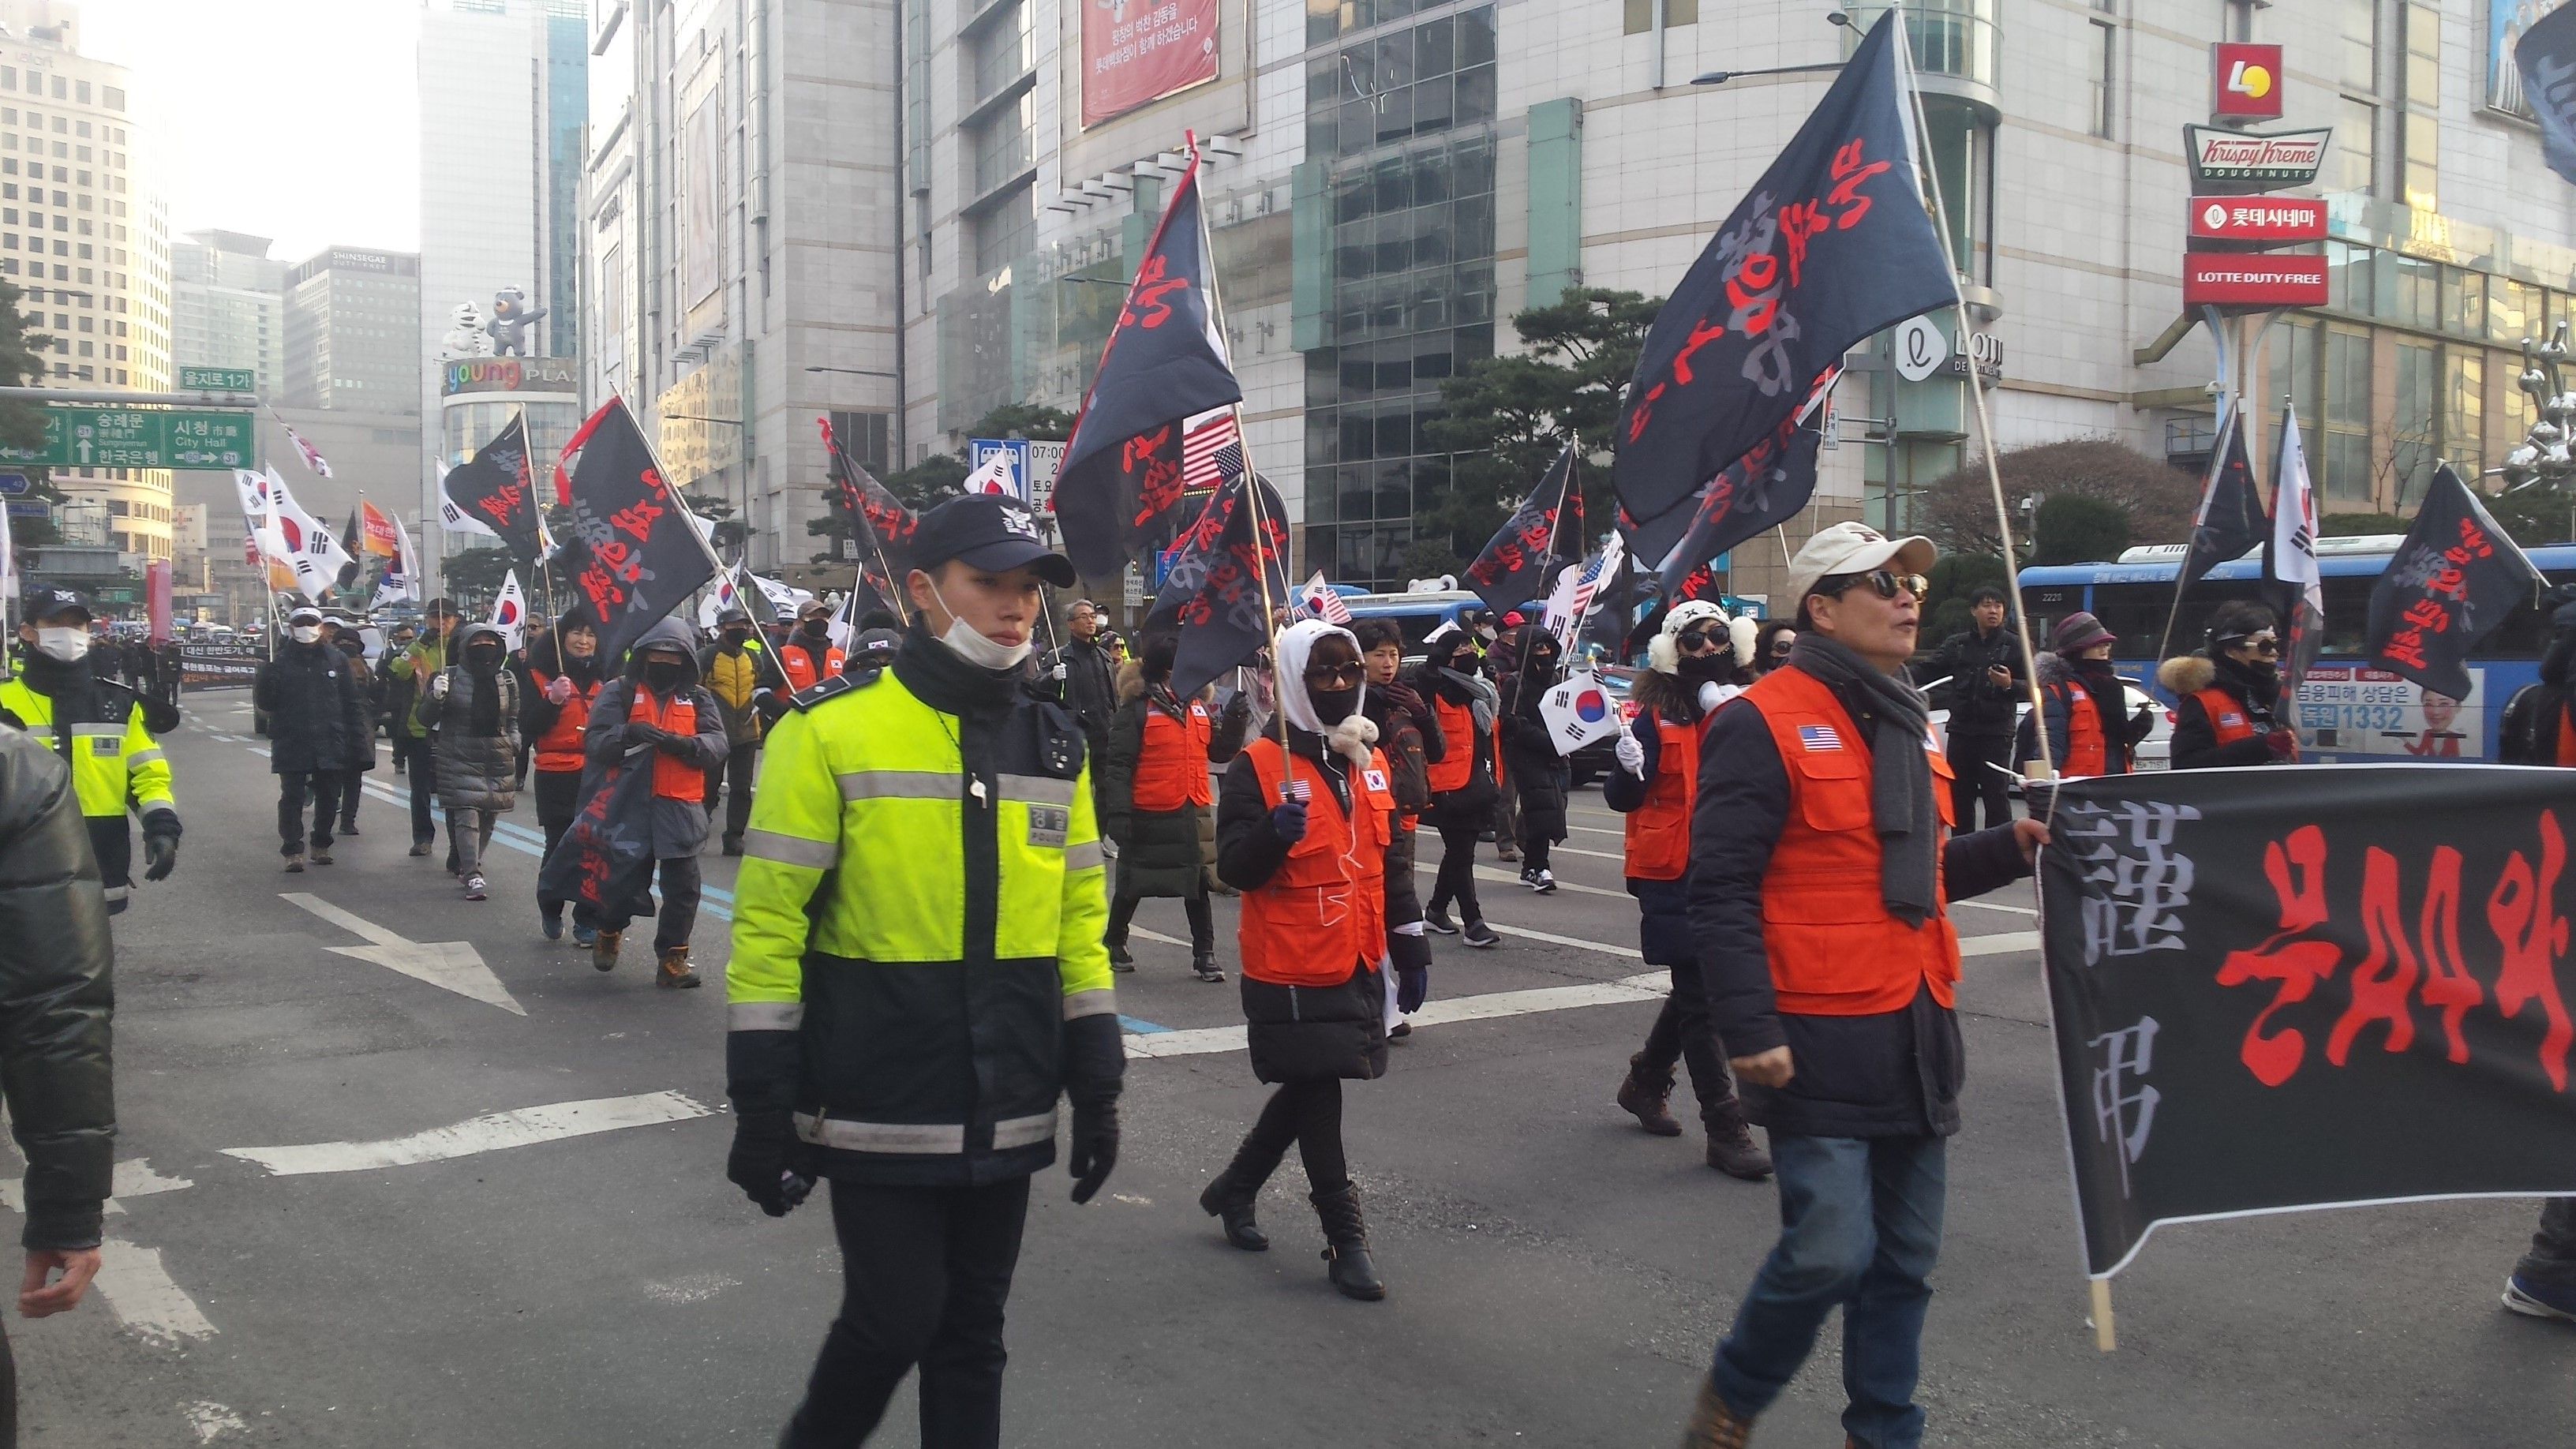 South Korean conservatives march through the streets of downtown Seoul in February in protest of their liberal president's diplomatic outreach to North Korea. Image by Rachel Oswald. South Korea, 2018.